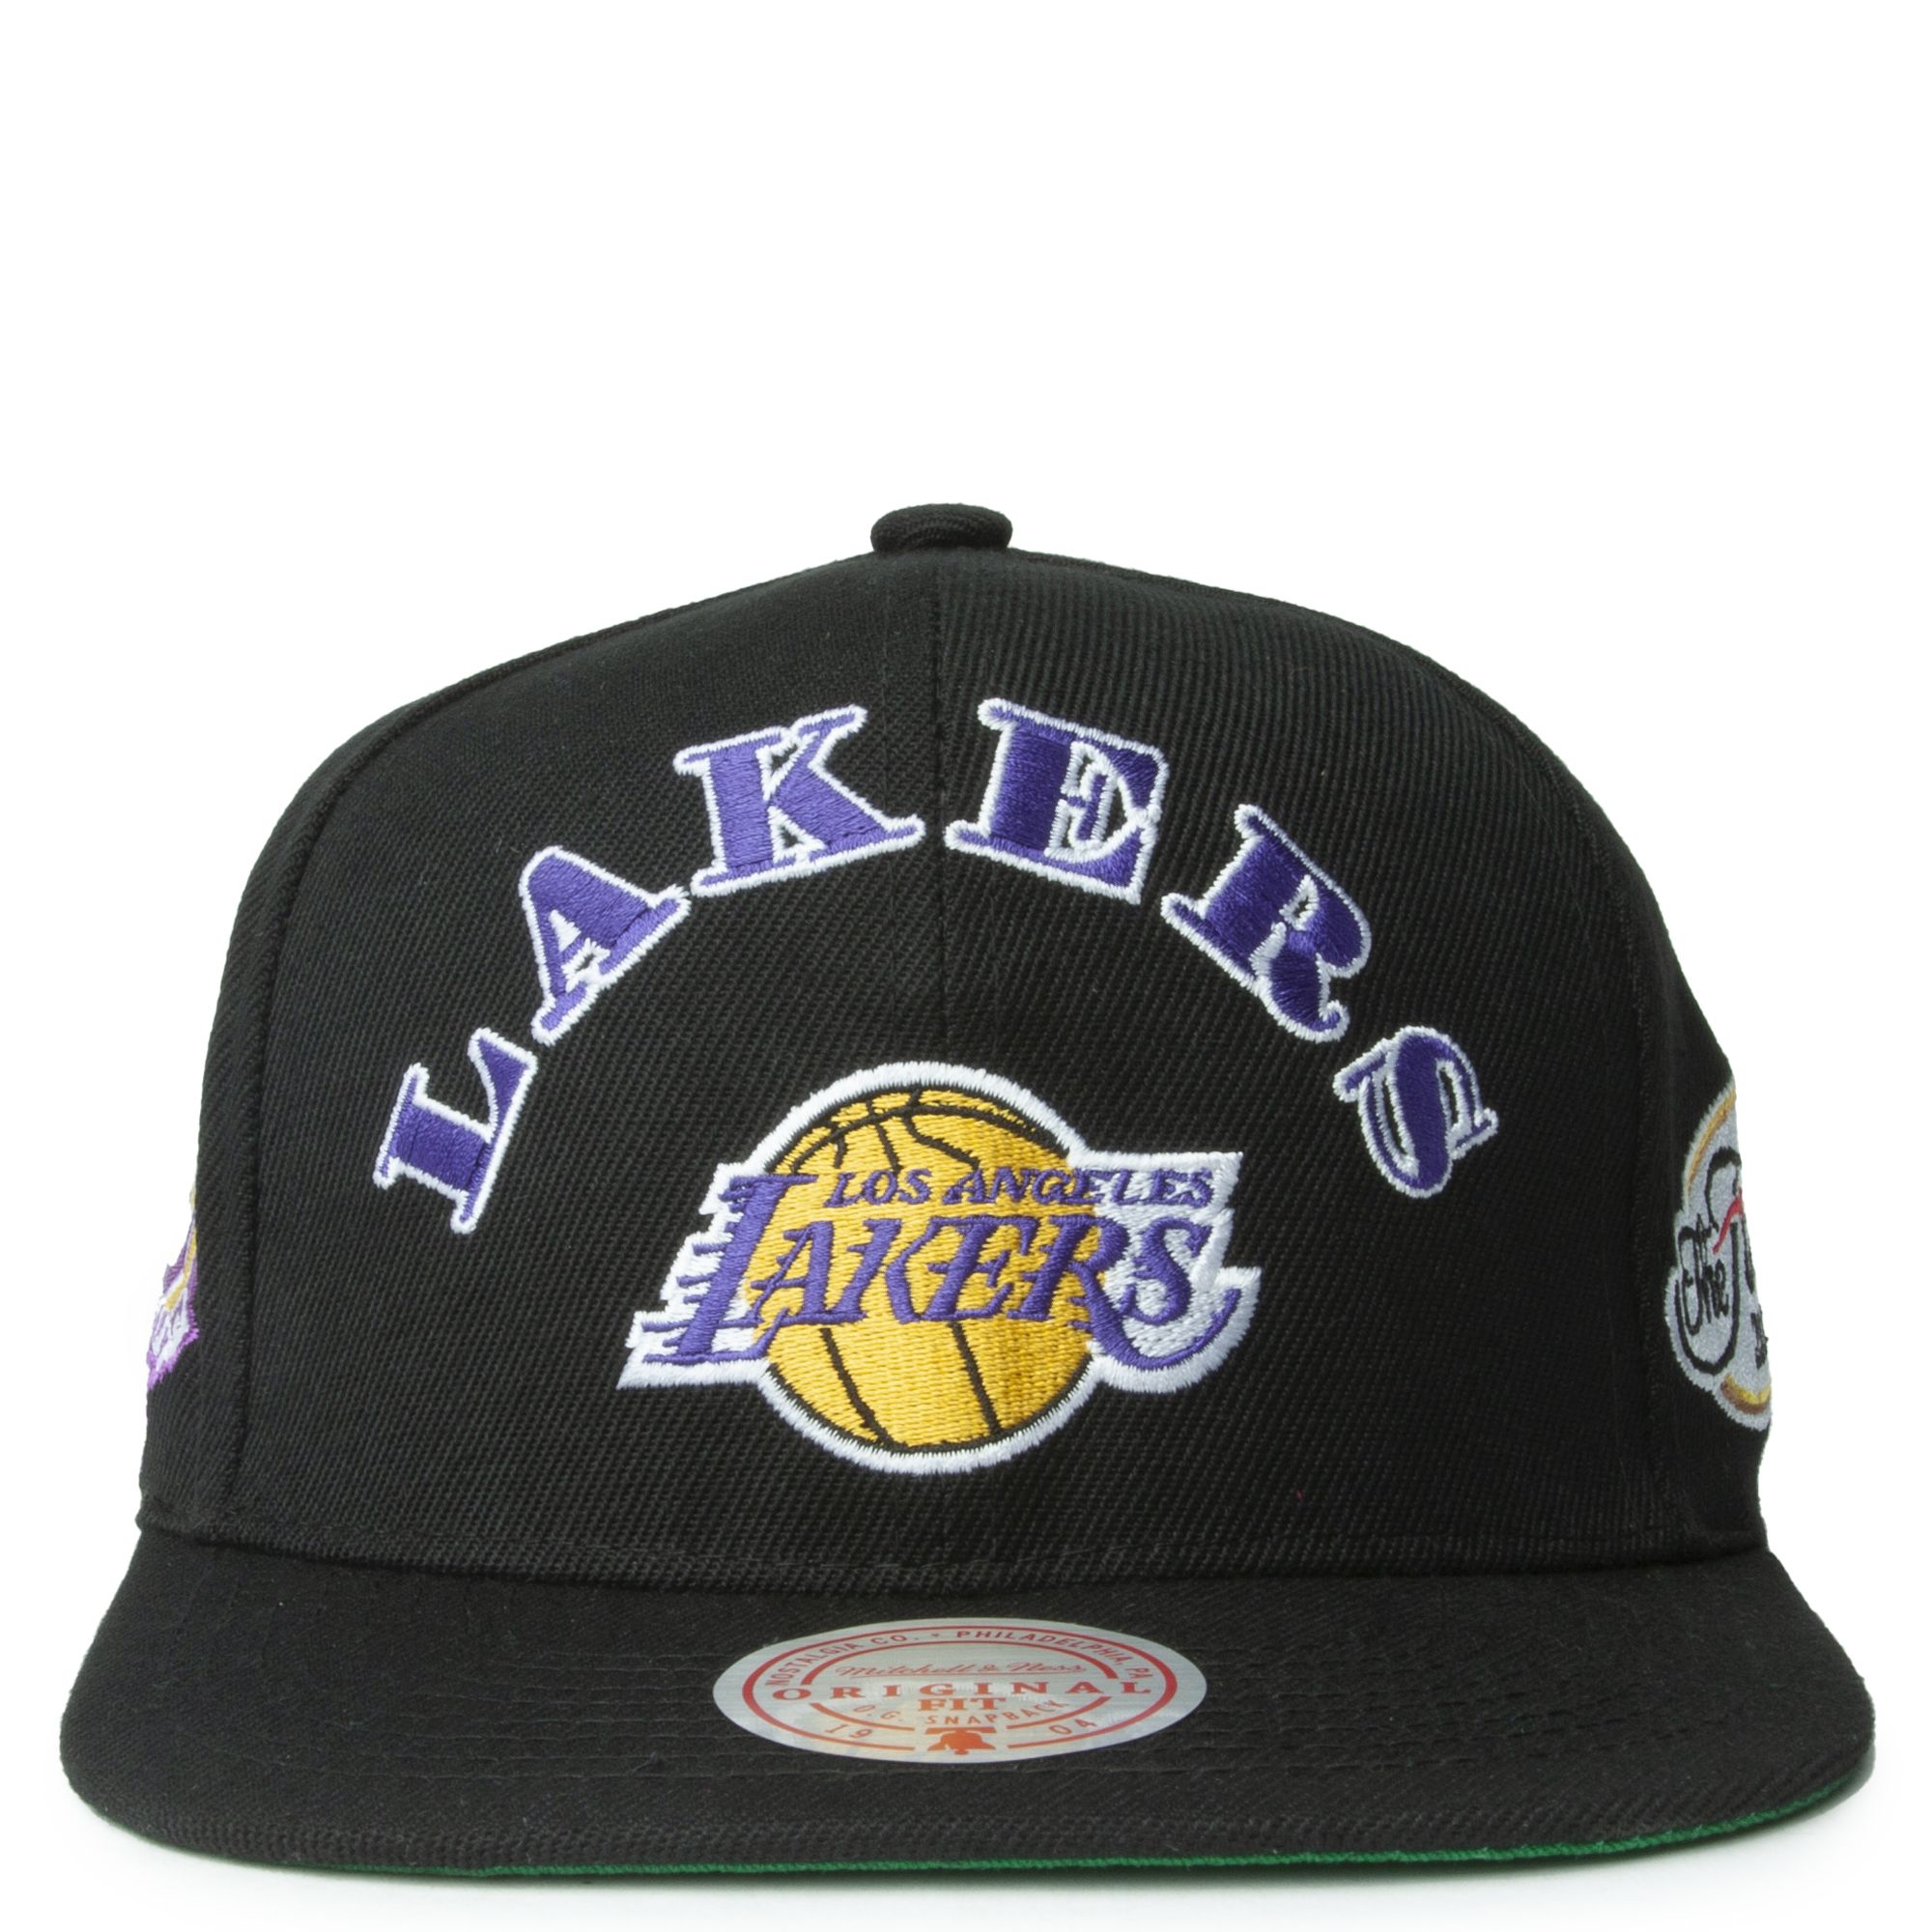 Mitchell and Ness Los Angeles Laker Snapback Black